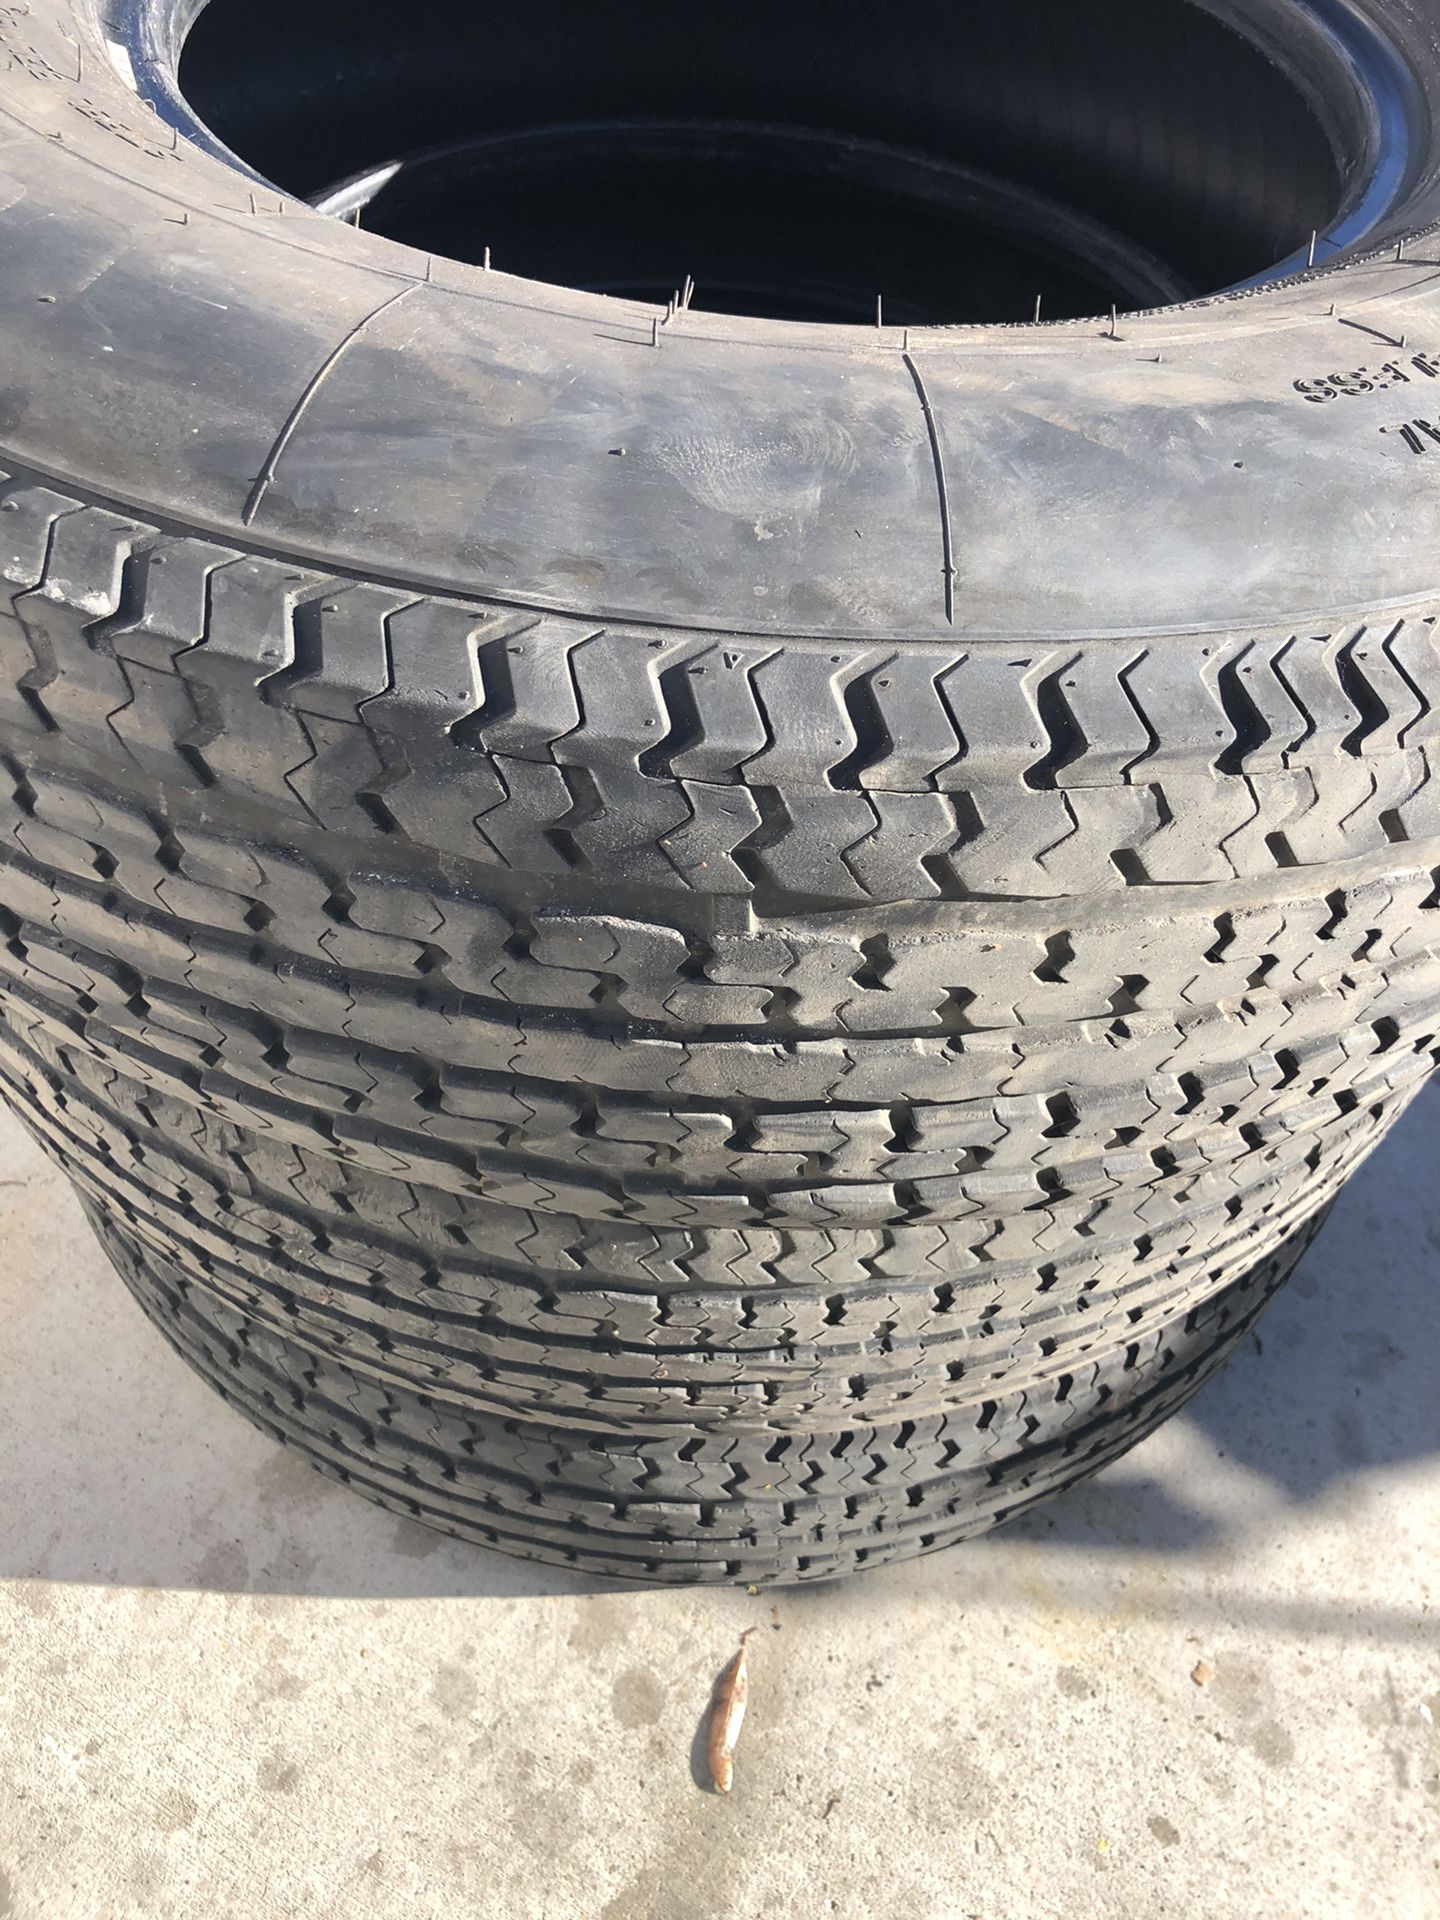 Trailer Tires 235 80 16 or 235 85 16